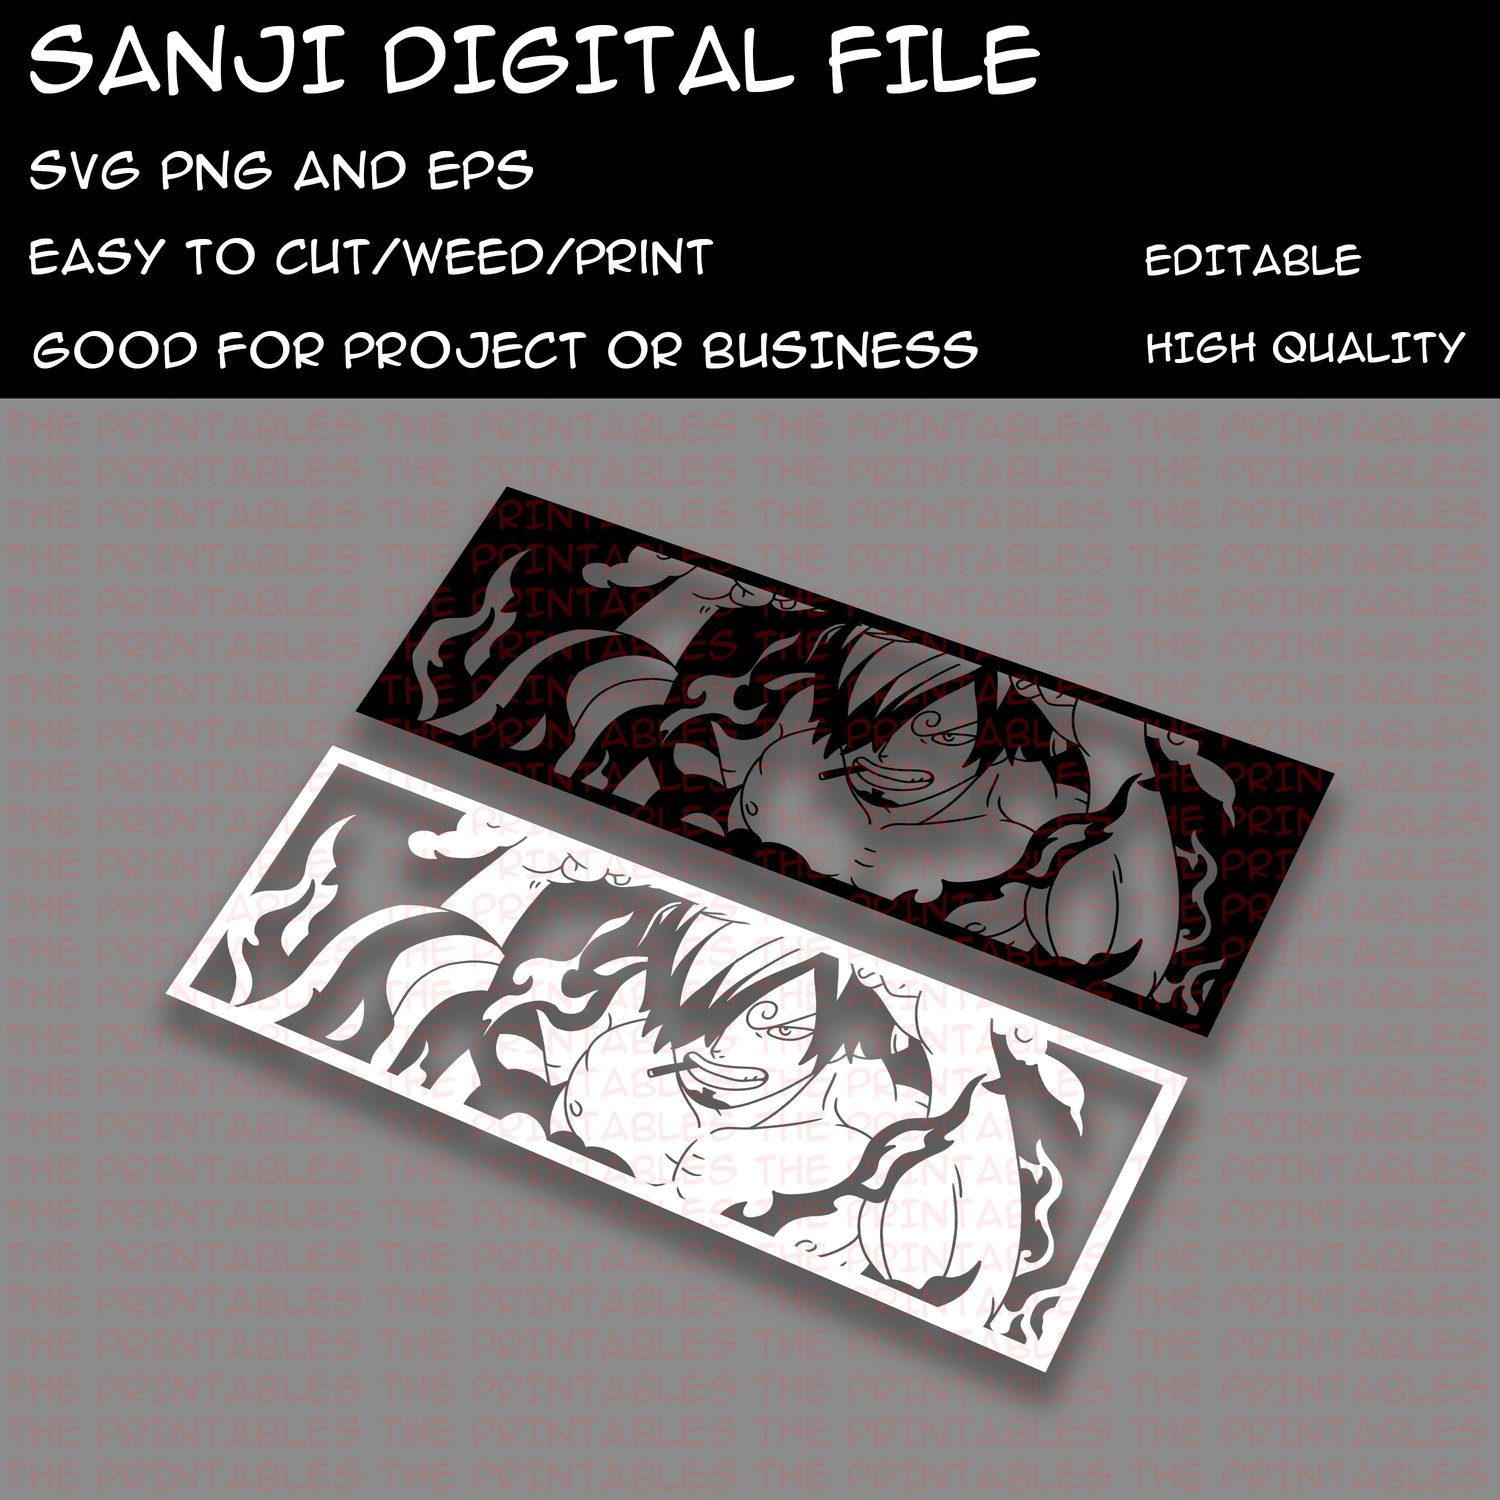 Sanji Stickers for Sale  Anime printables, Anime stickers, Black and white  stickers